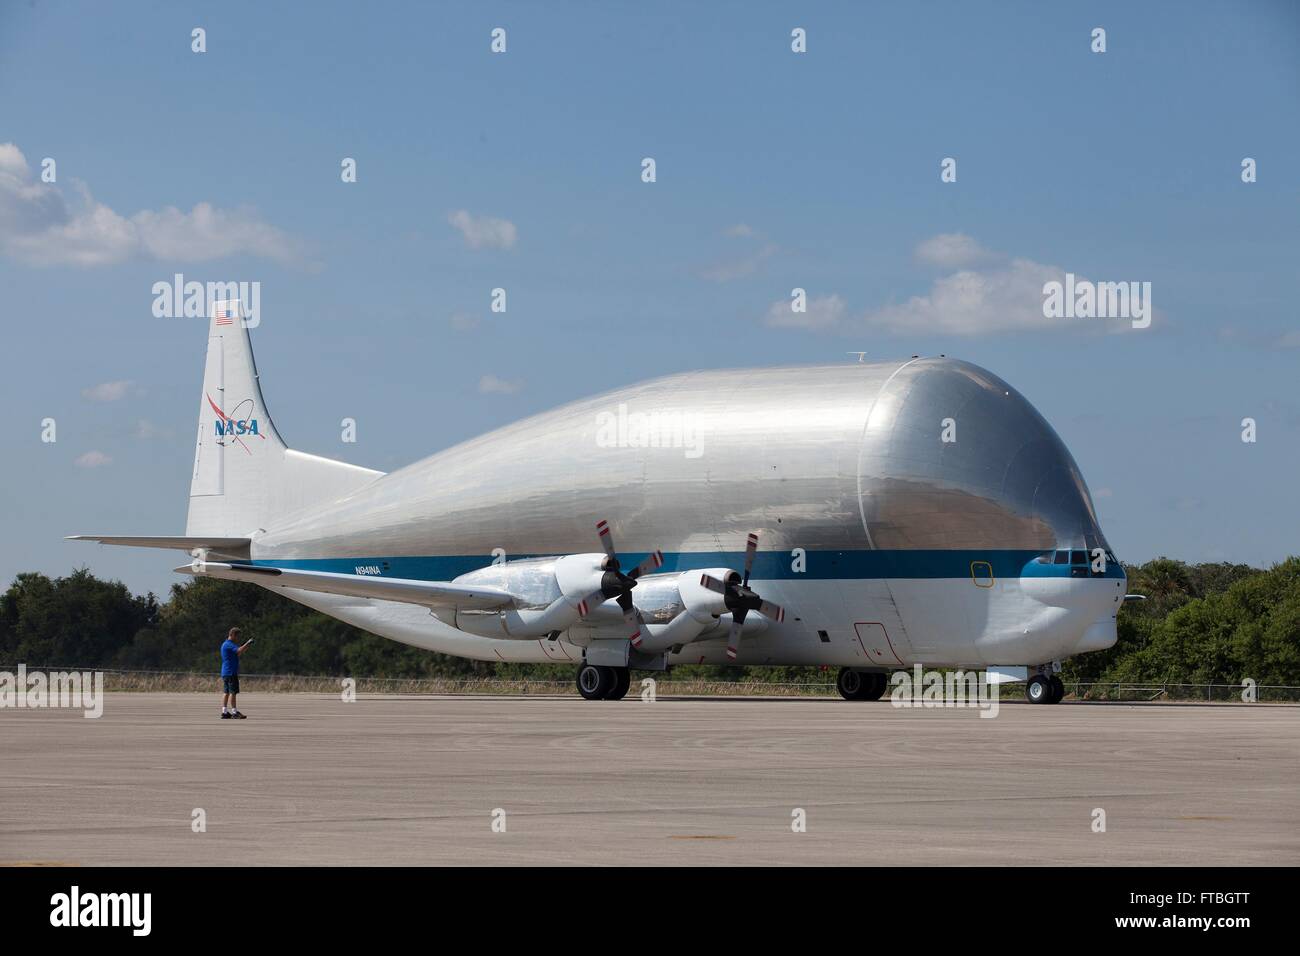 The Super Guppy cargo aircraft taxis to the ramp of the Shuttle Landing Facility at the Kennedy Space Center November 2, 2015 in Cape Canaveral, Florida. Stock Photo